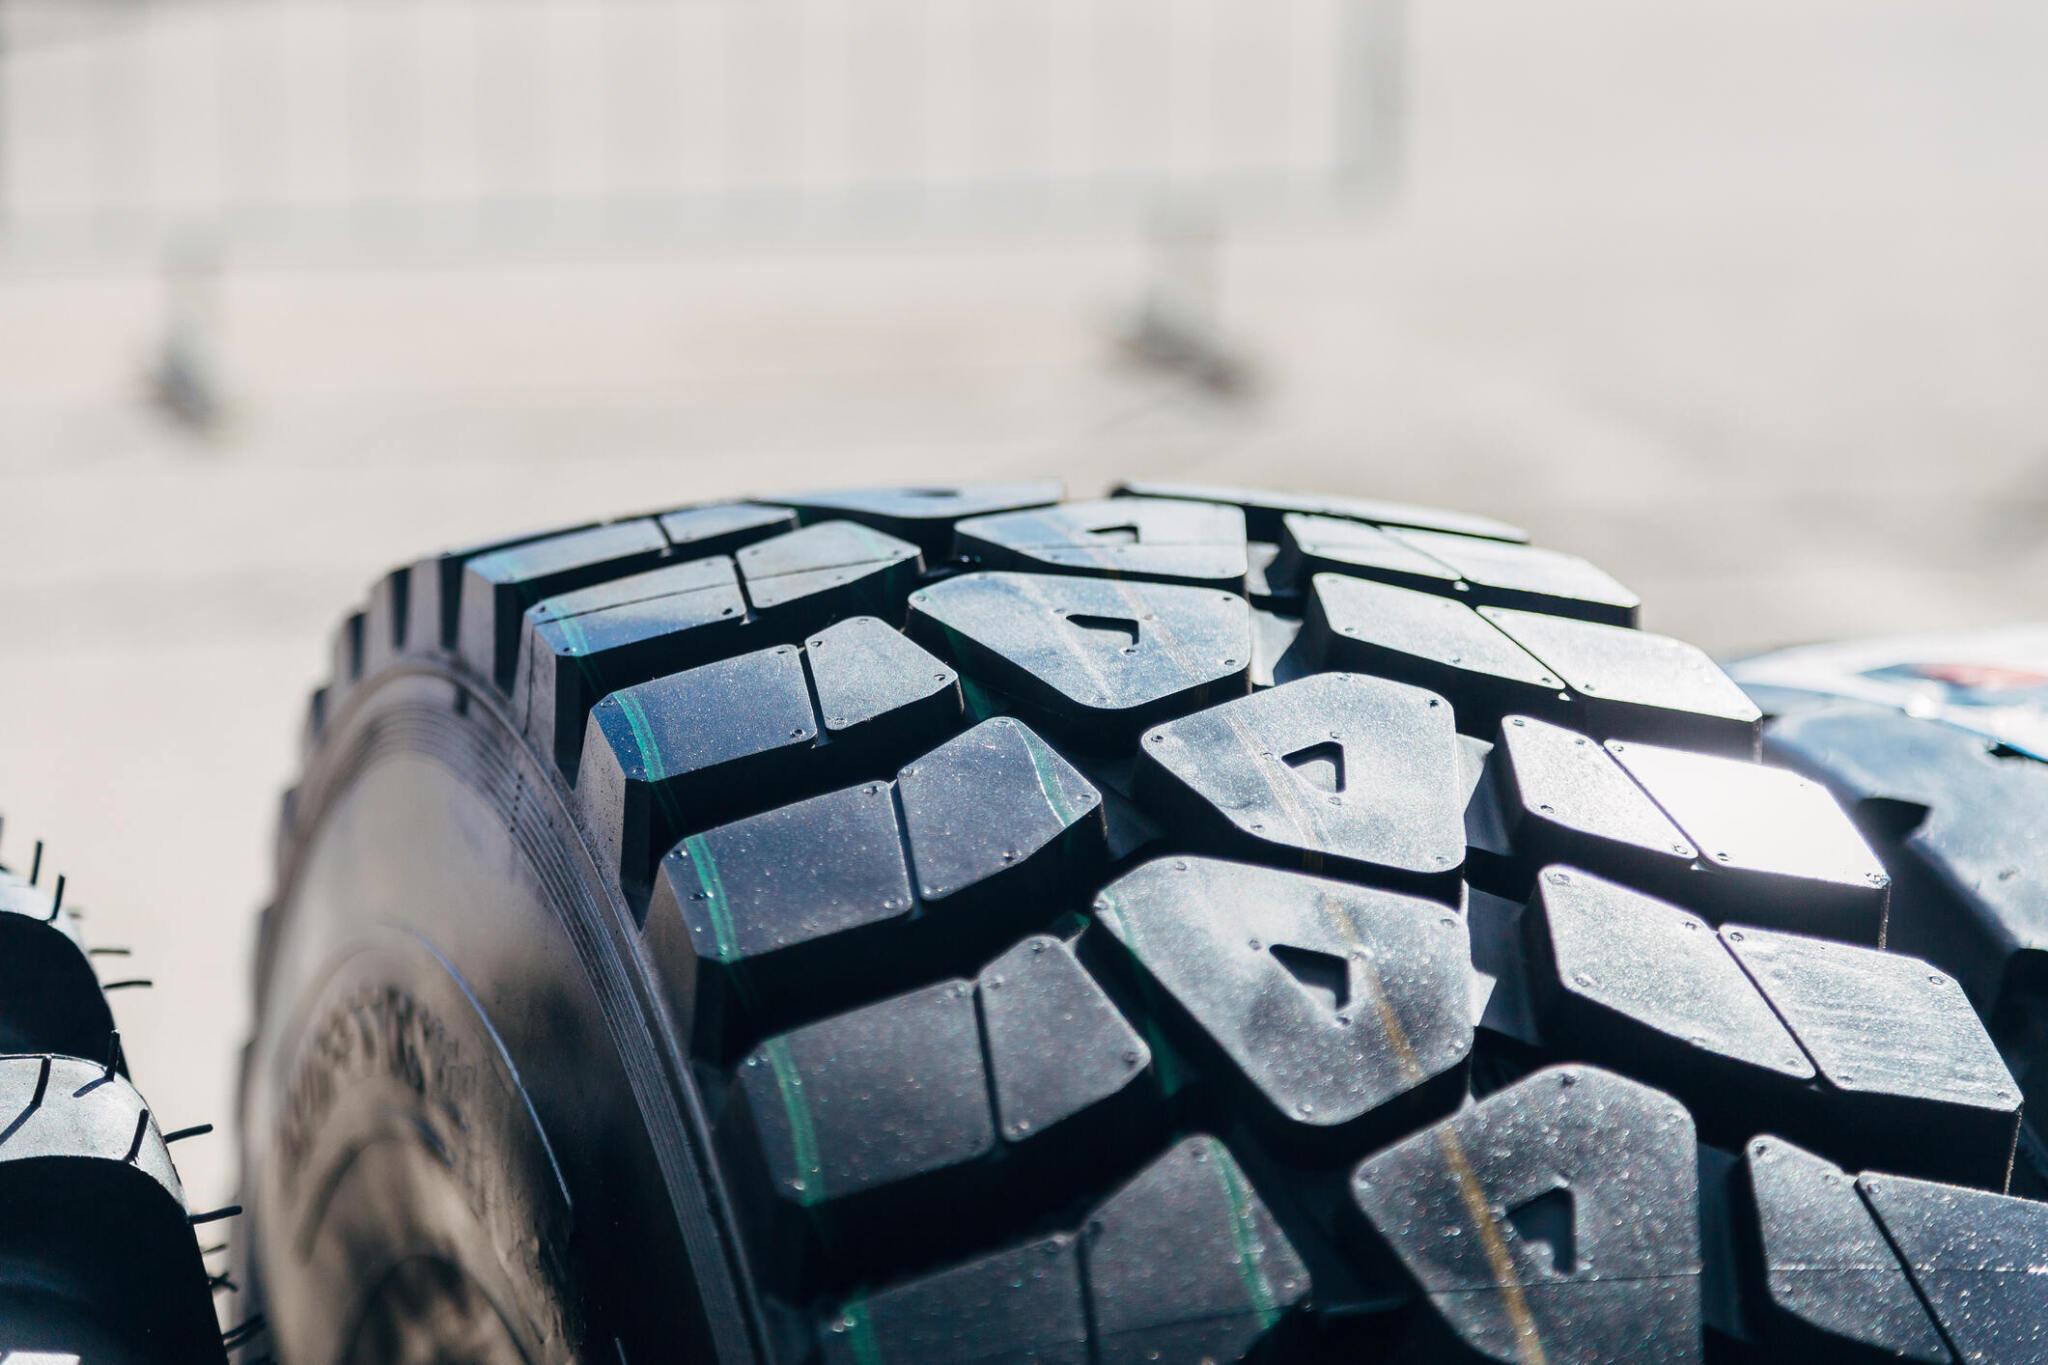 Find Your Perfect Tire Size: Expert Guidance from Giga Tires/Tire Size